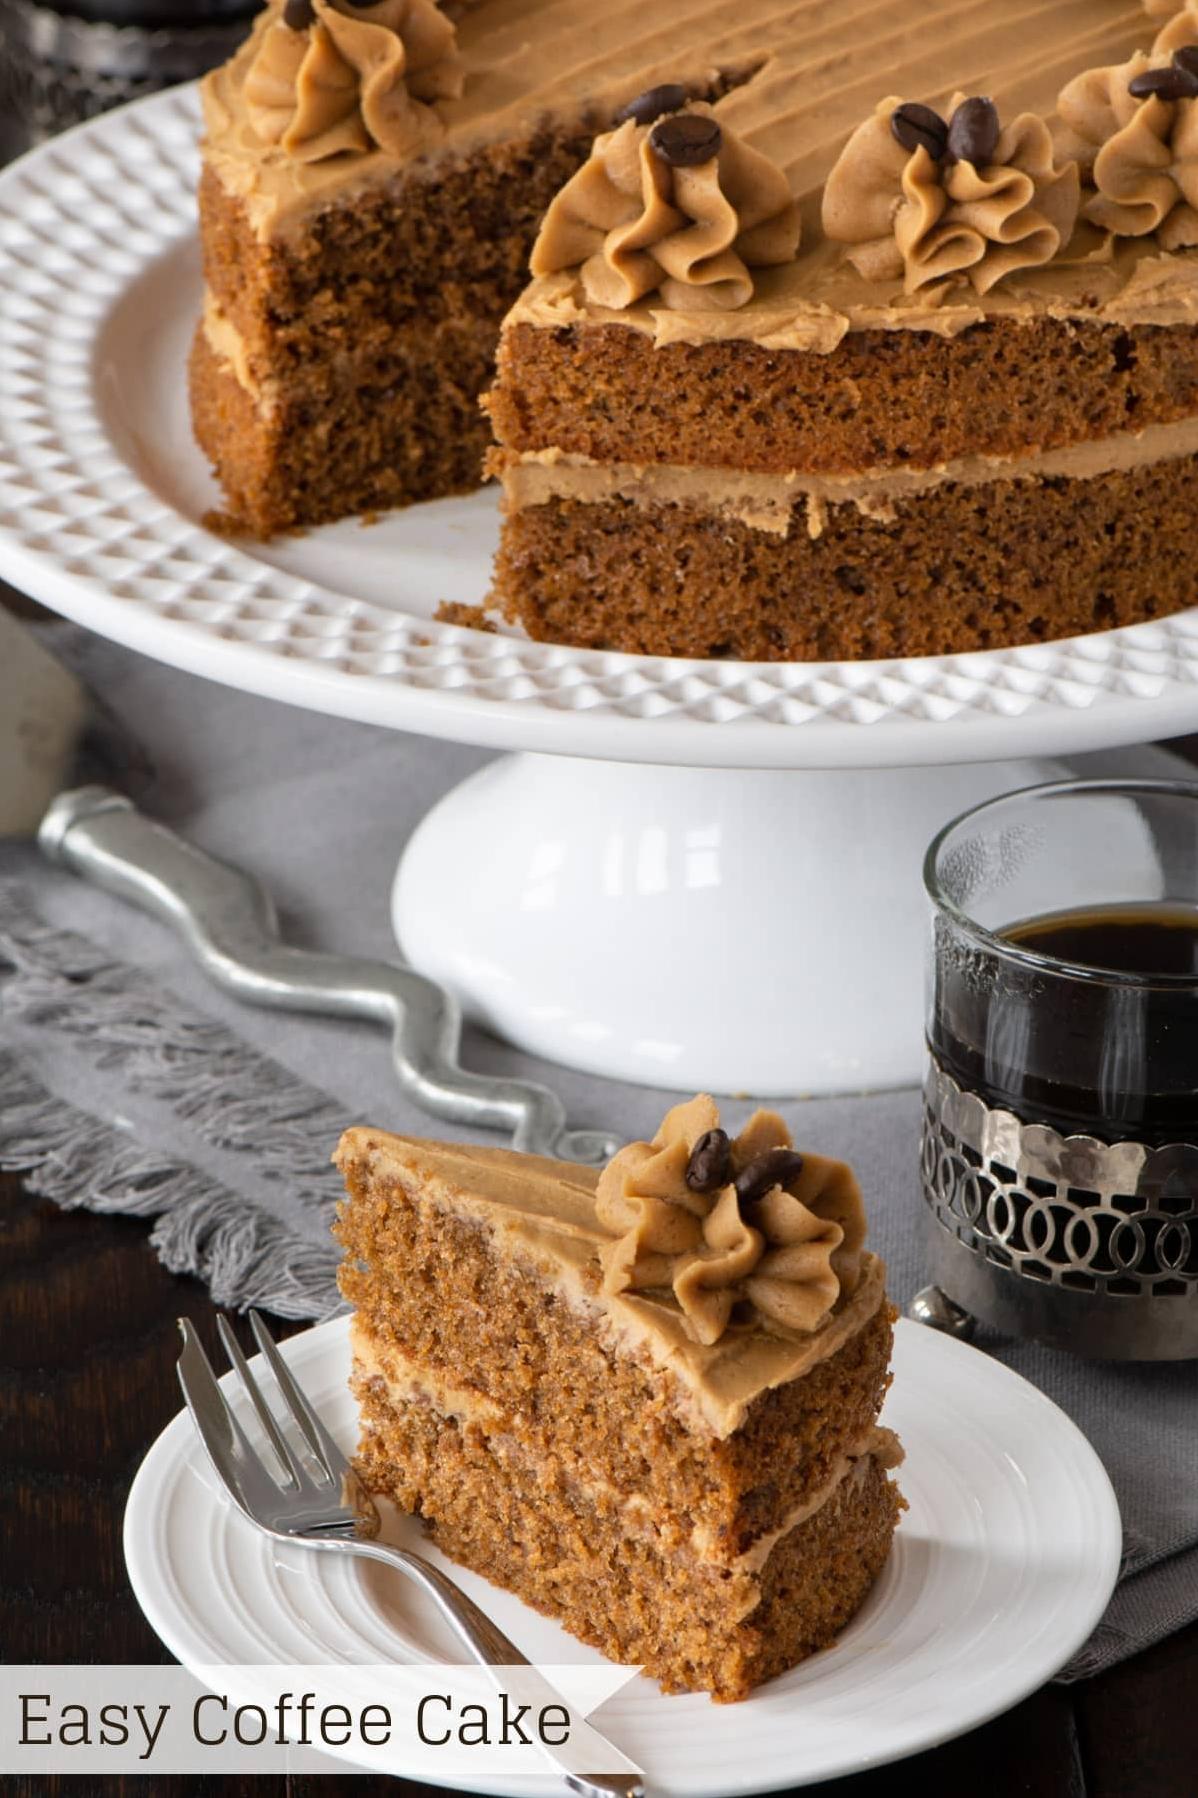  Coffee and cake have never been a better match, and with this easy recipe, you can make your own at home!